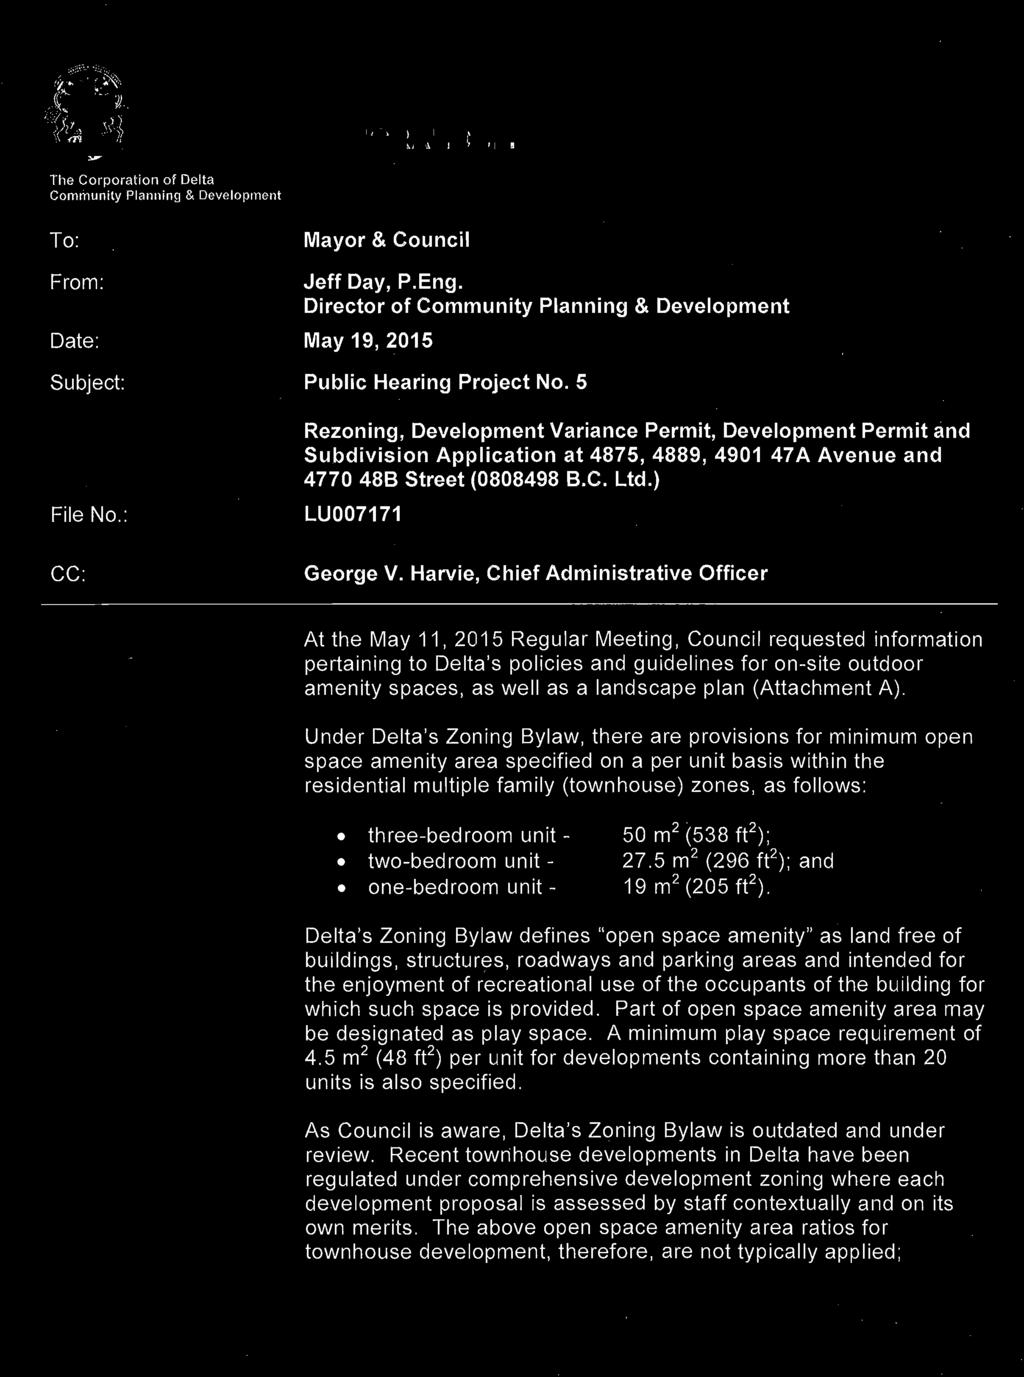 bdivision Application at 4875, 4889, 4901 47 A Avenue and 4770 48B Street (0808498 B.C. Ltd.) LU007171 George V. Harvie, Chief Administrative Officer!